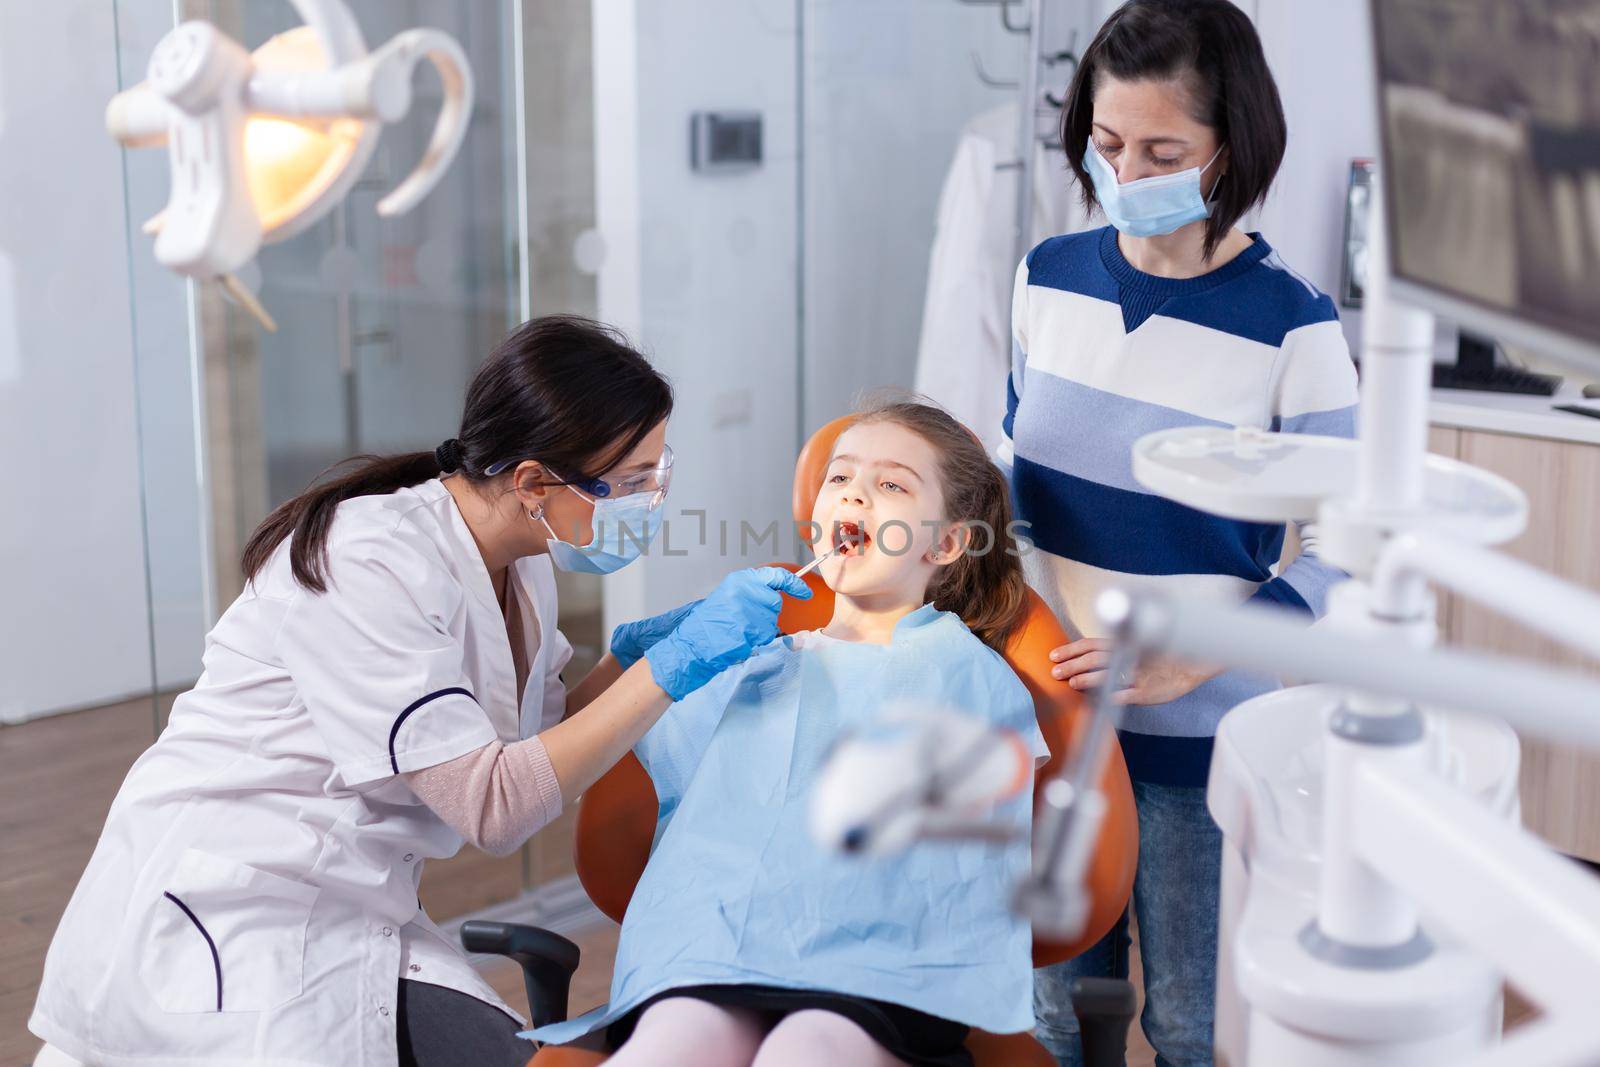 Dentist using mirror in the course of kid mouth examination by DCStudio